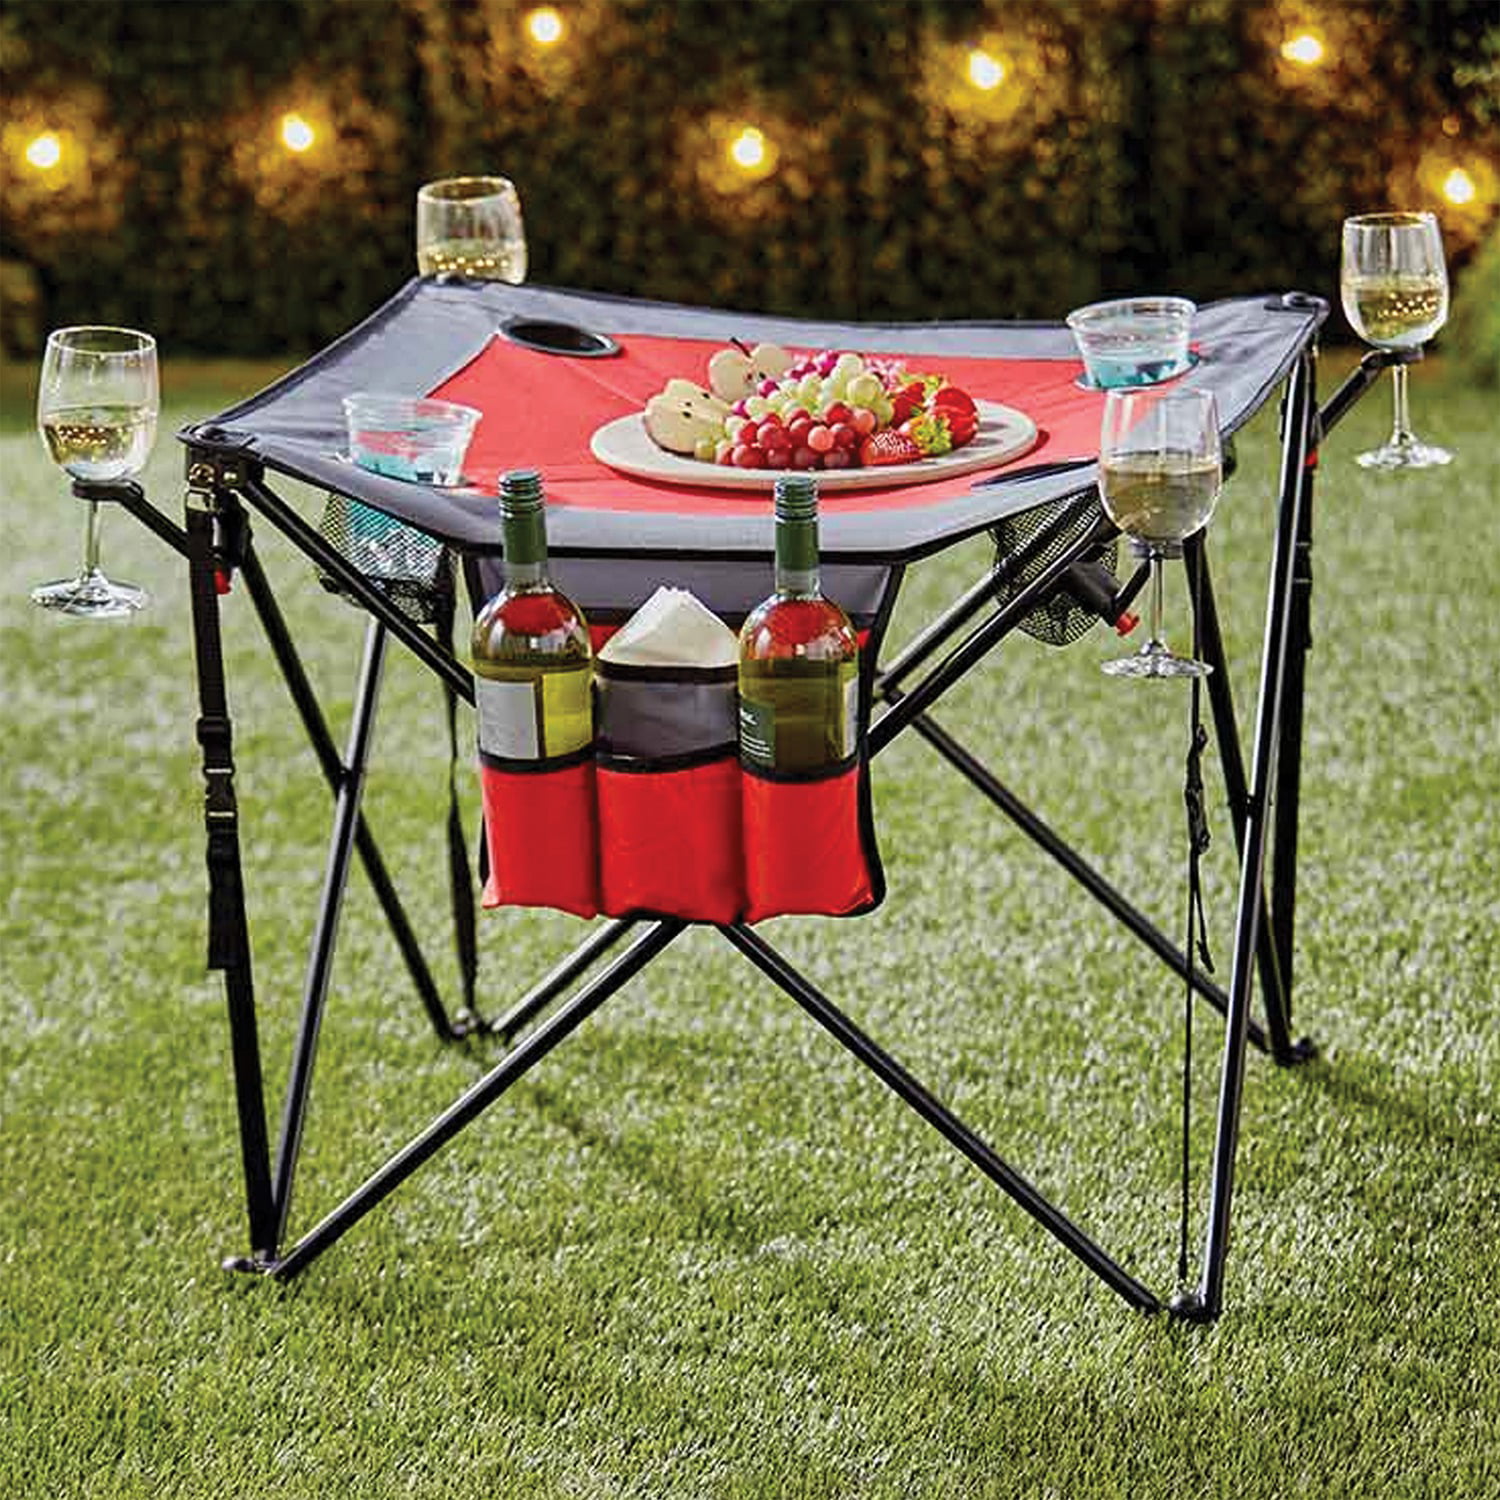 SC Outdoor Folding Pop-Up Tailgate Wine Table Pop Up Easily Lightweight and Portable Red/Grey 